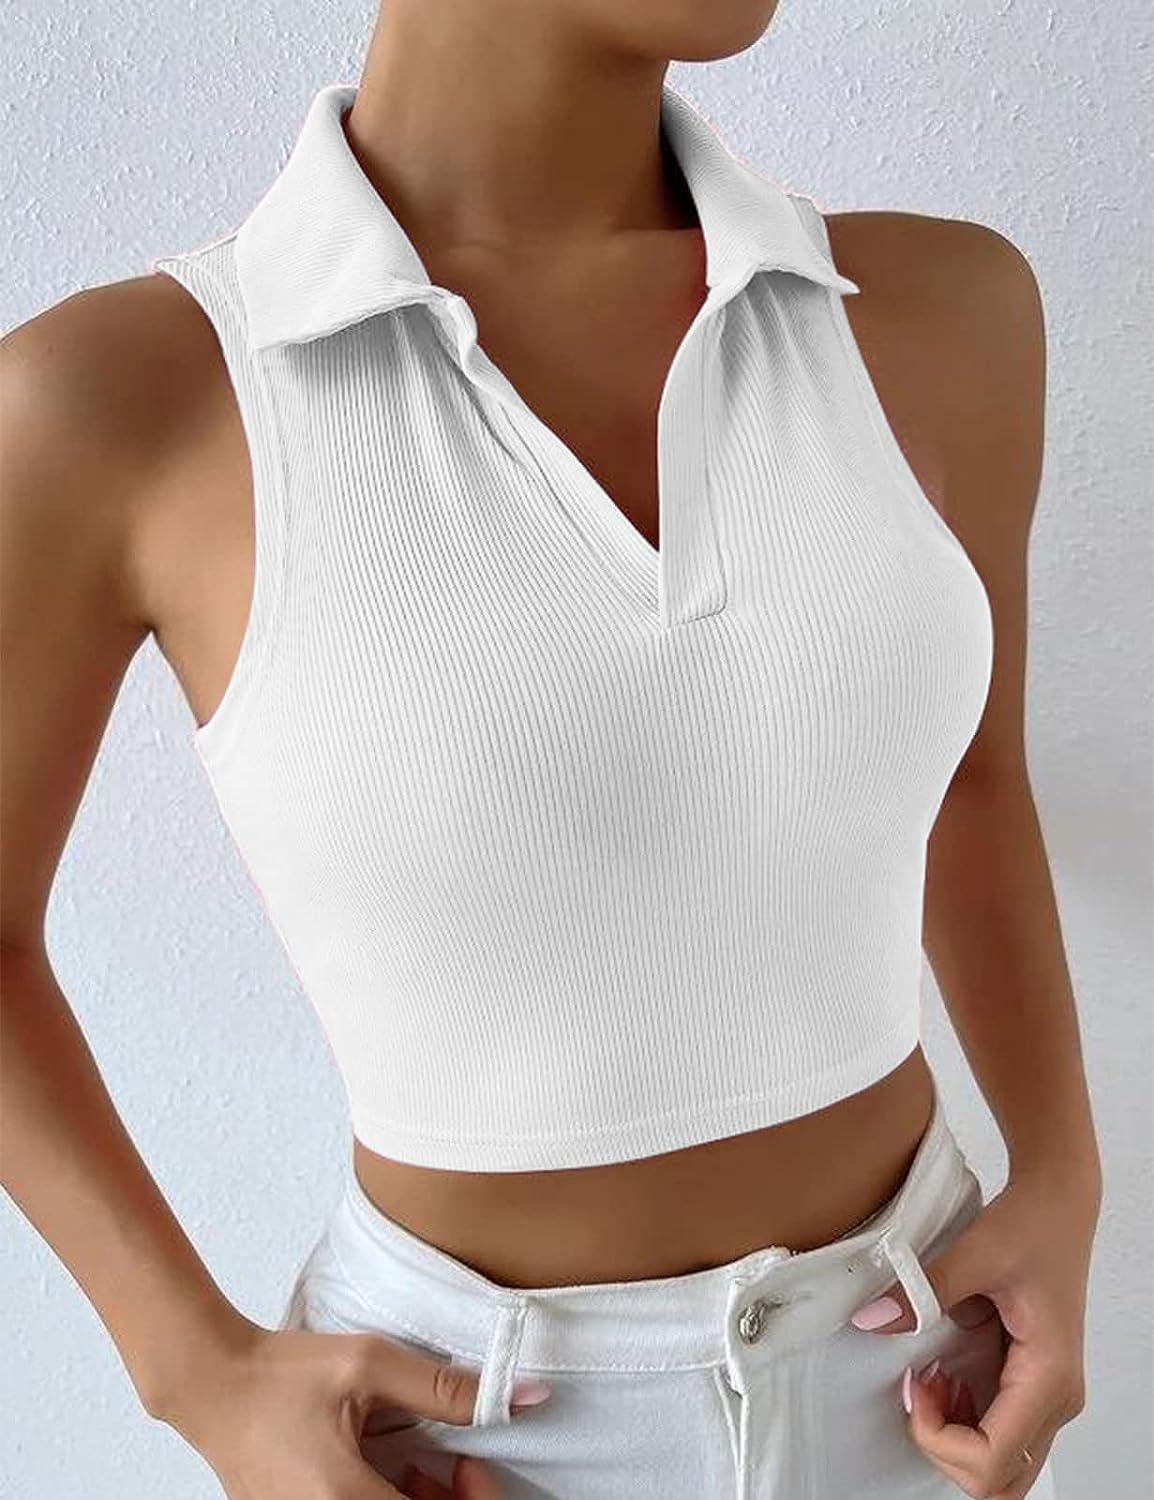 Best Deal for Tank top with Built in Bra for Women Tube top